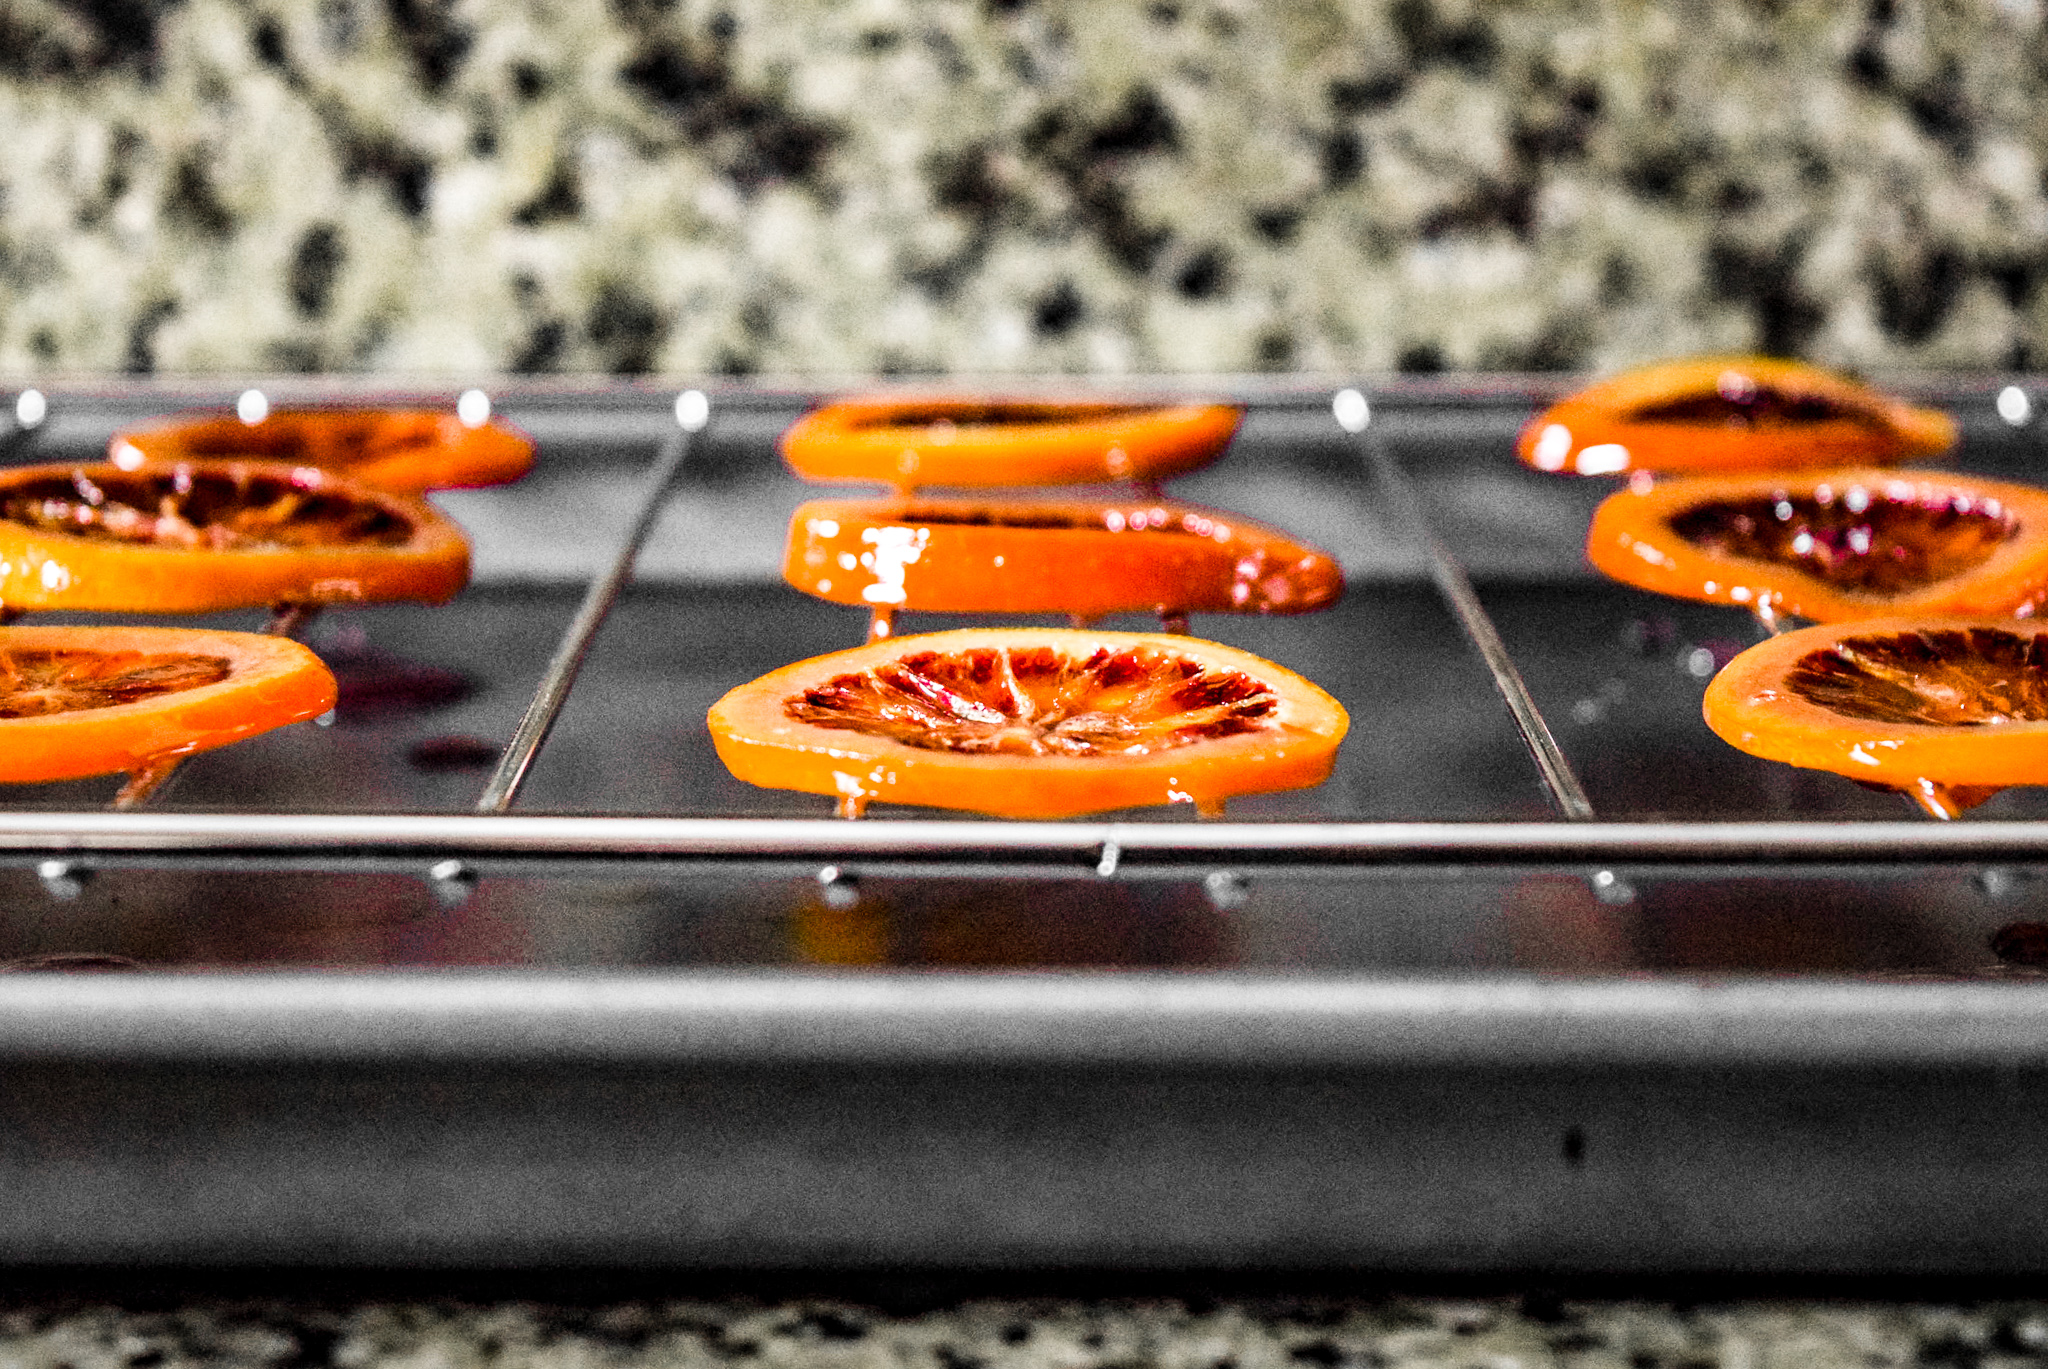 Two-Ingredient Candied Blood Orange Rounds drying and hardening after candying from front